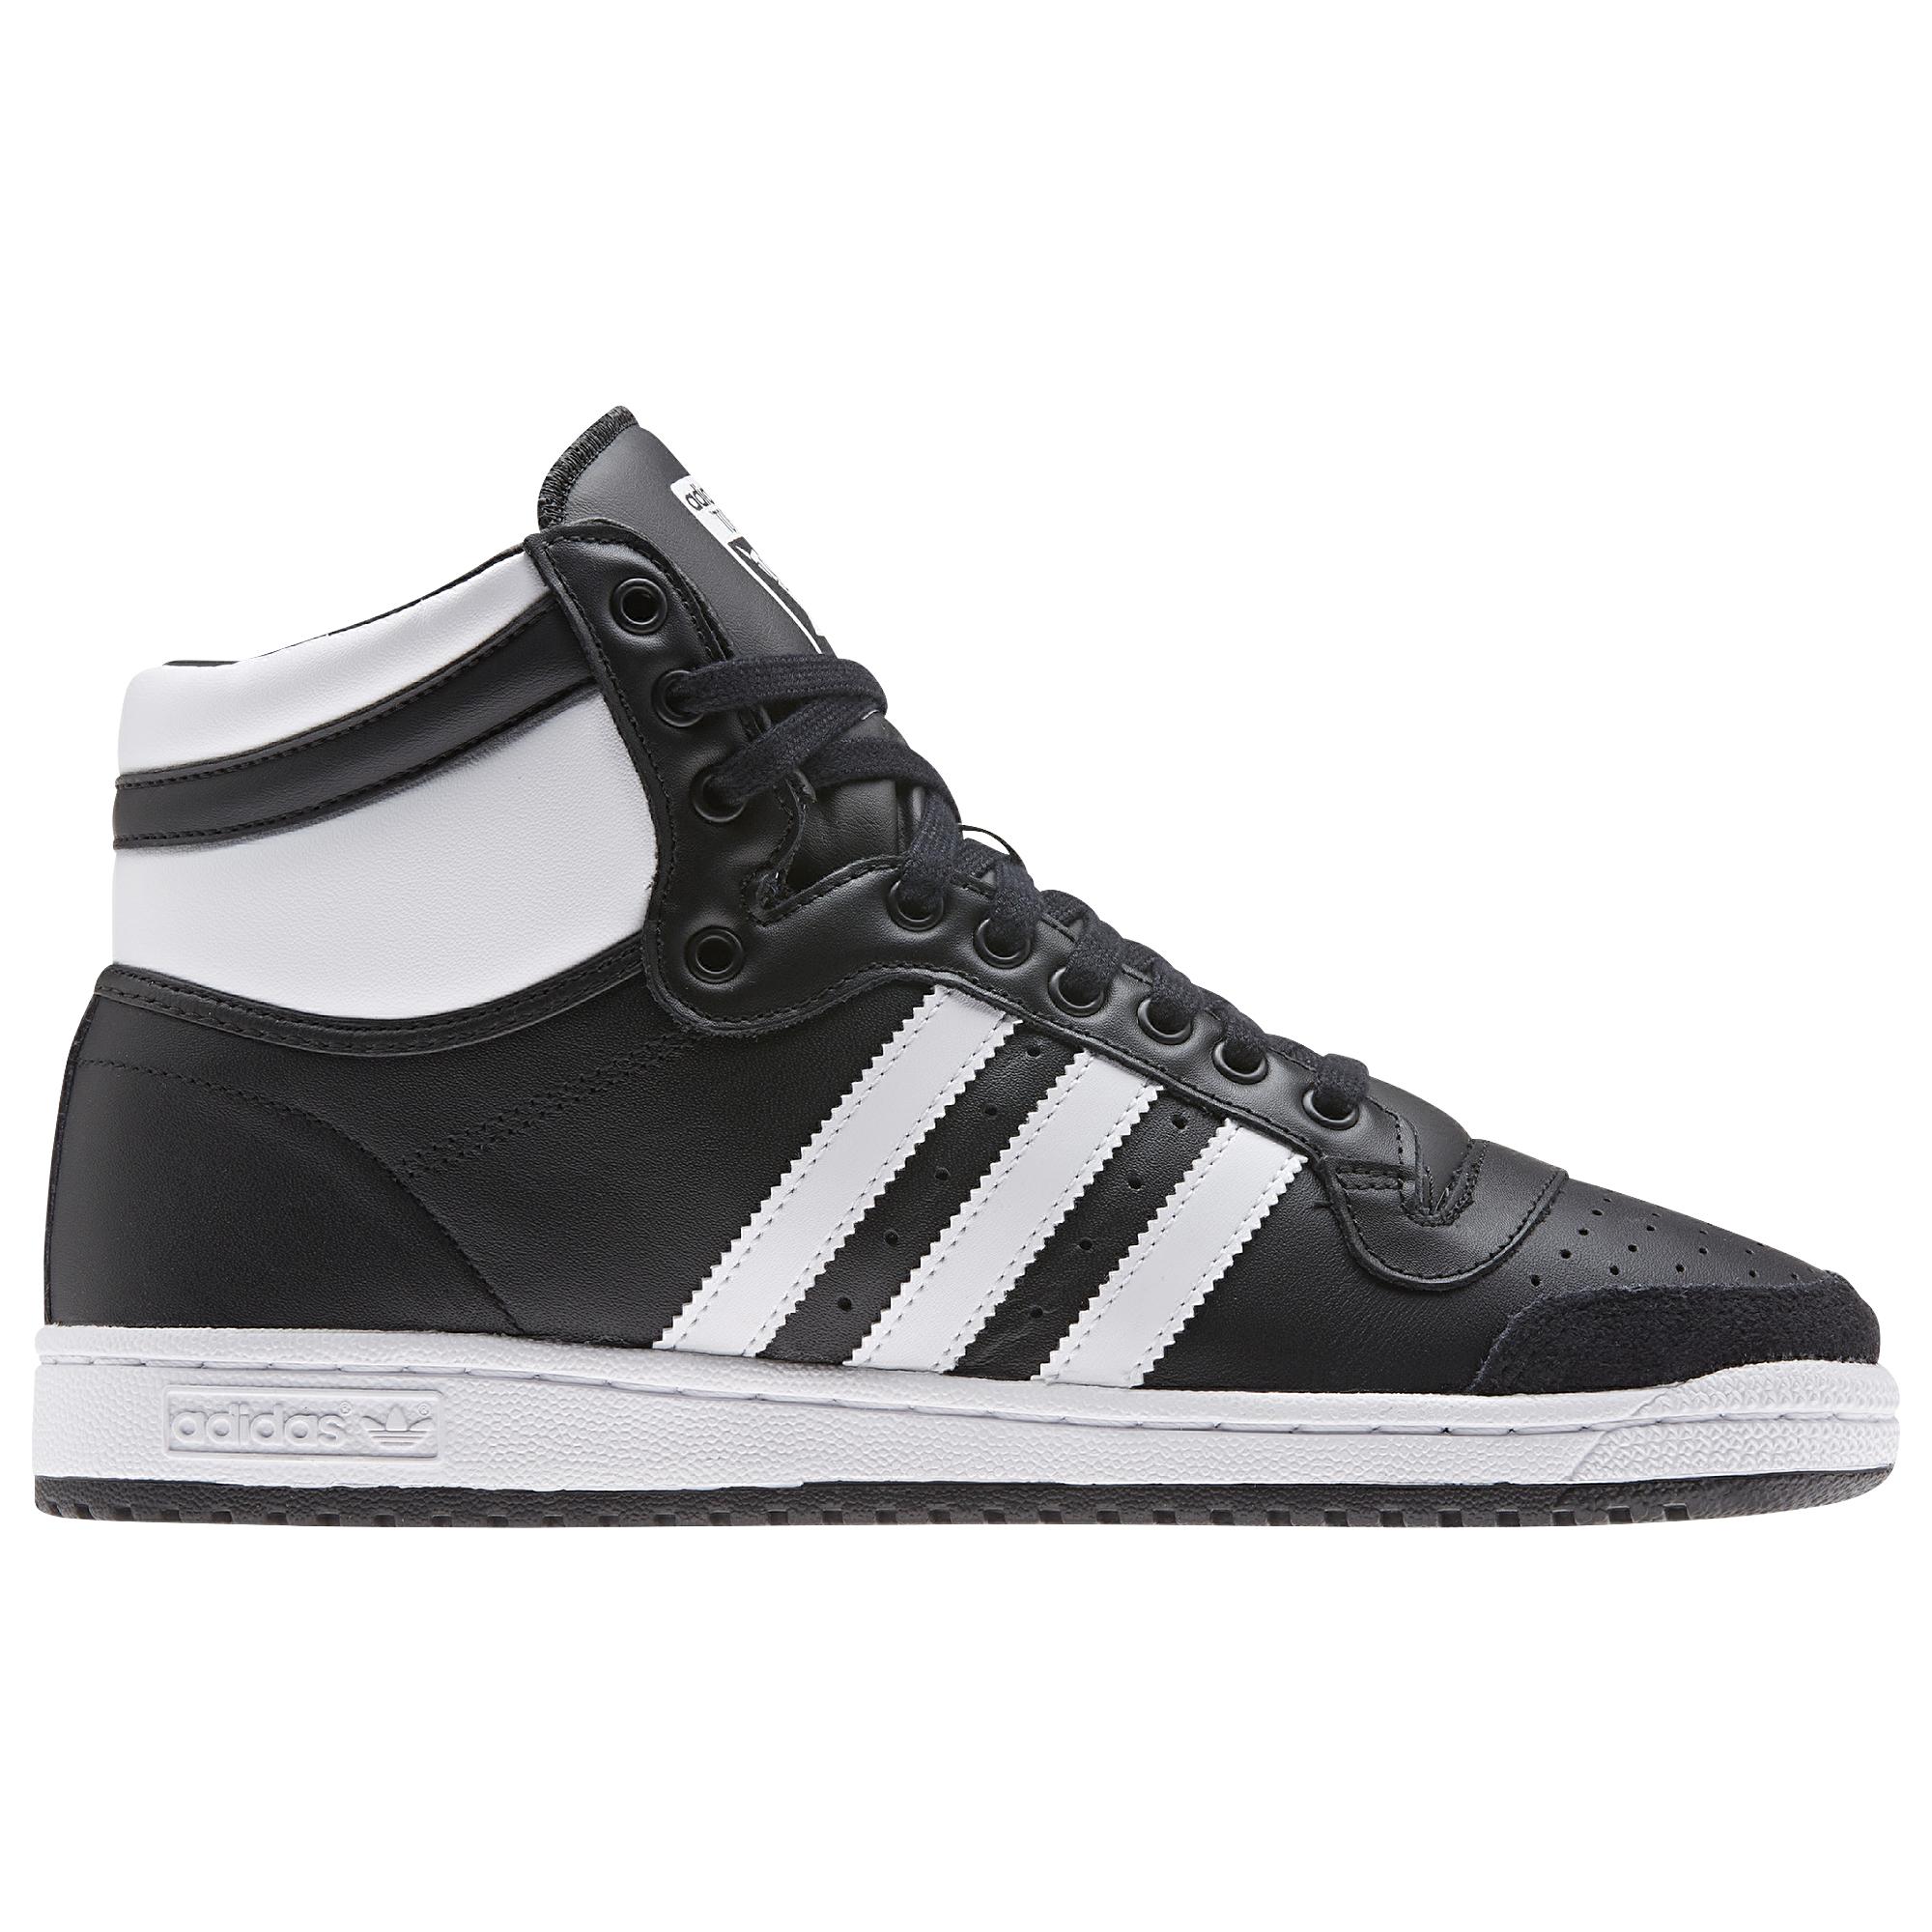 Adidas Originals Leather Top Ten Hi Basketball Shoes In Black White